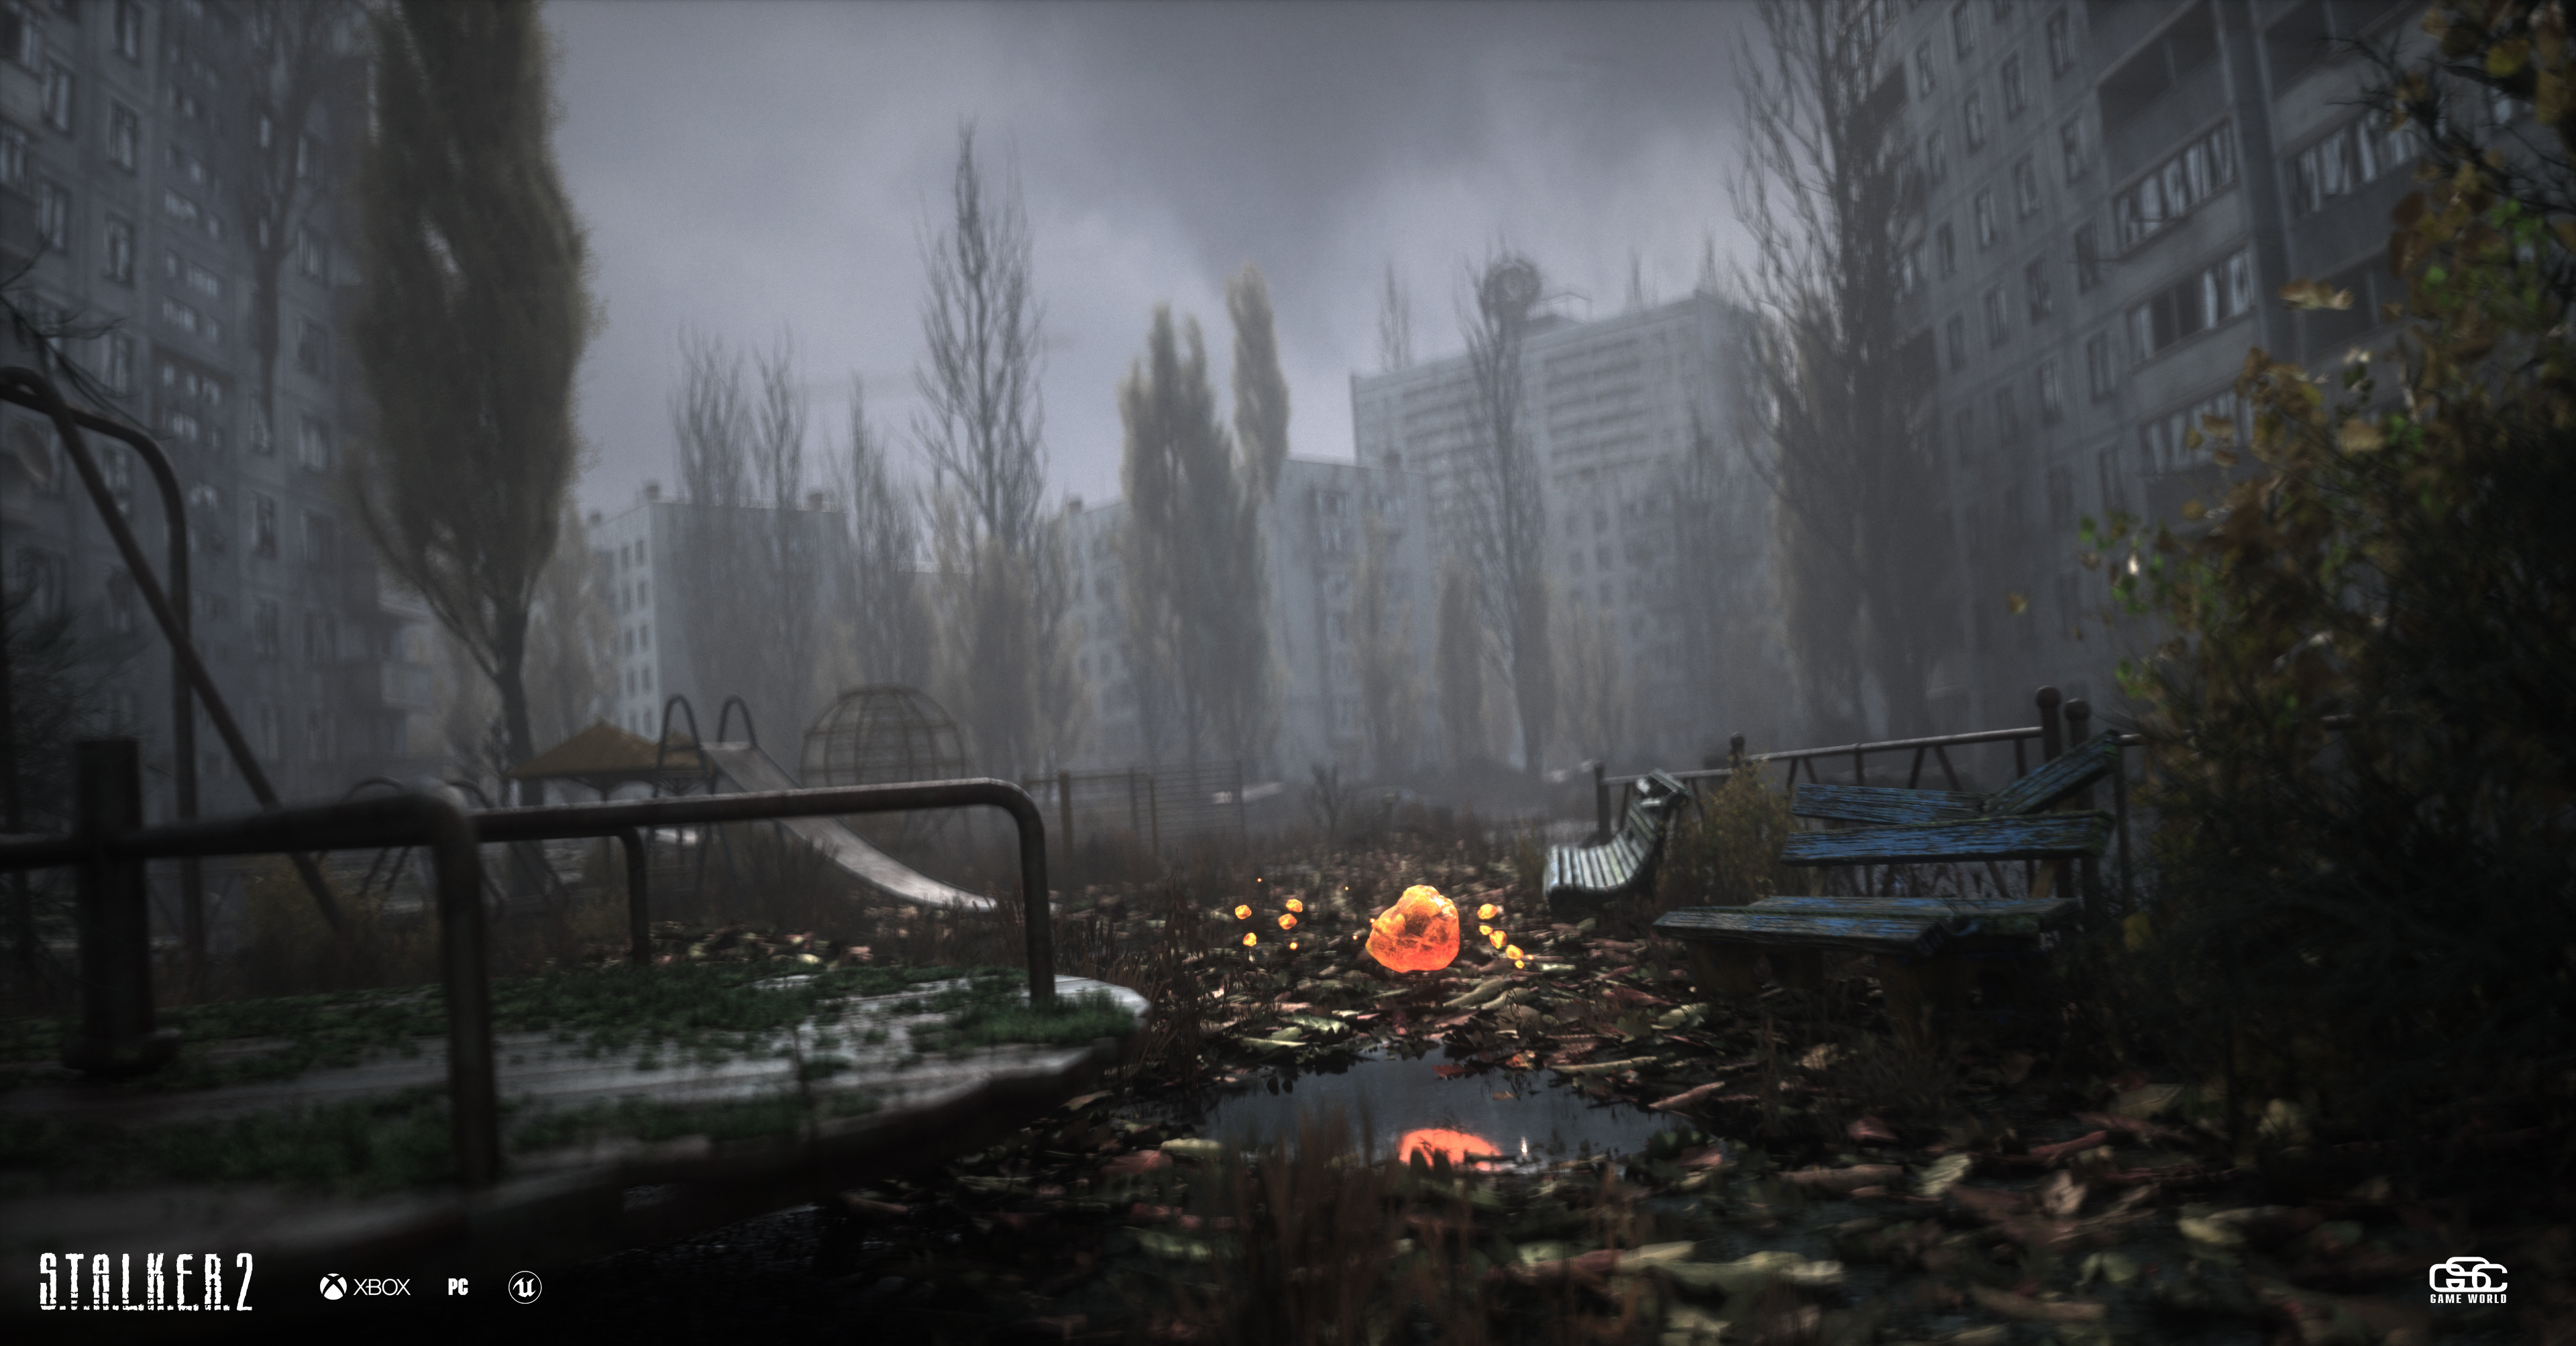 General 3840x2006 S.T.A.L.K.E.R. S.T.A.L.K.E.R.: Shadow of Chernobyl cinematic post apocalypse pine trees shooter S.T.A.L.K.E.R. 2